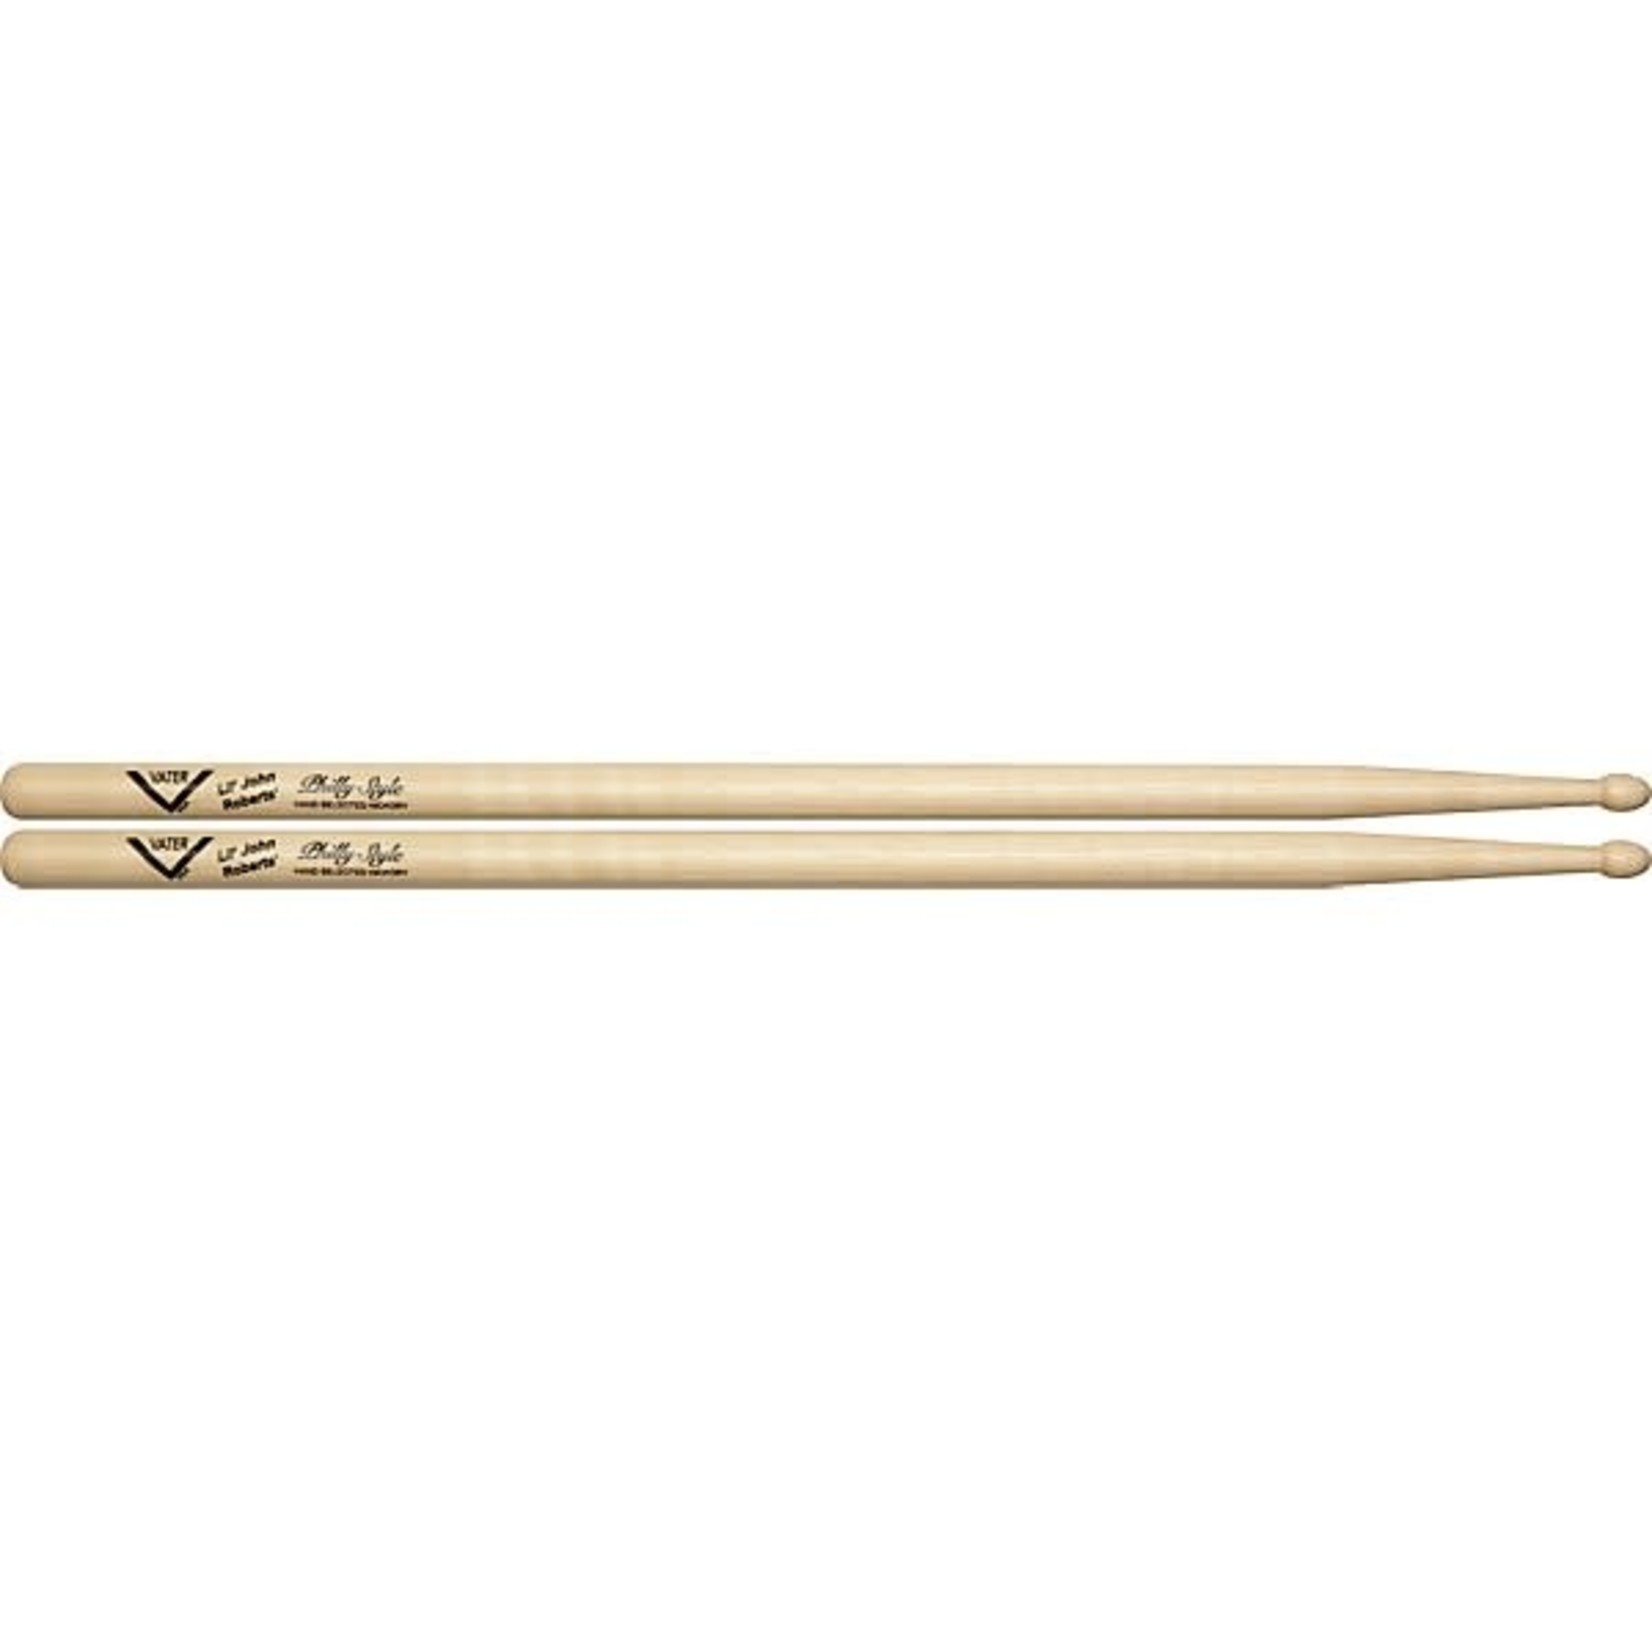 Vater Vater Lil' John Roberts' Philly Style Drumstick